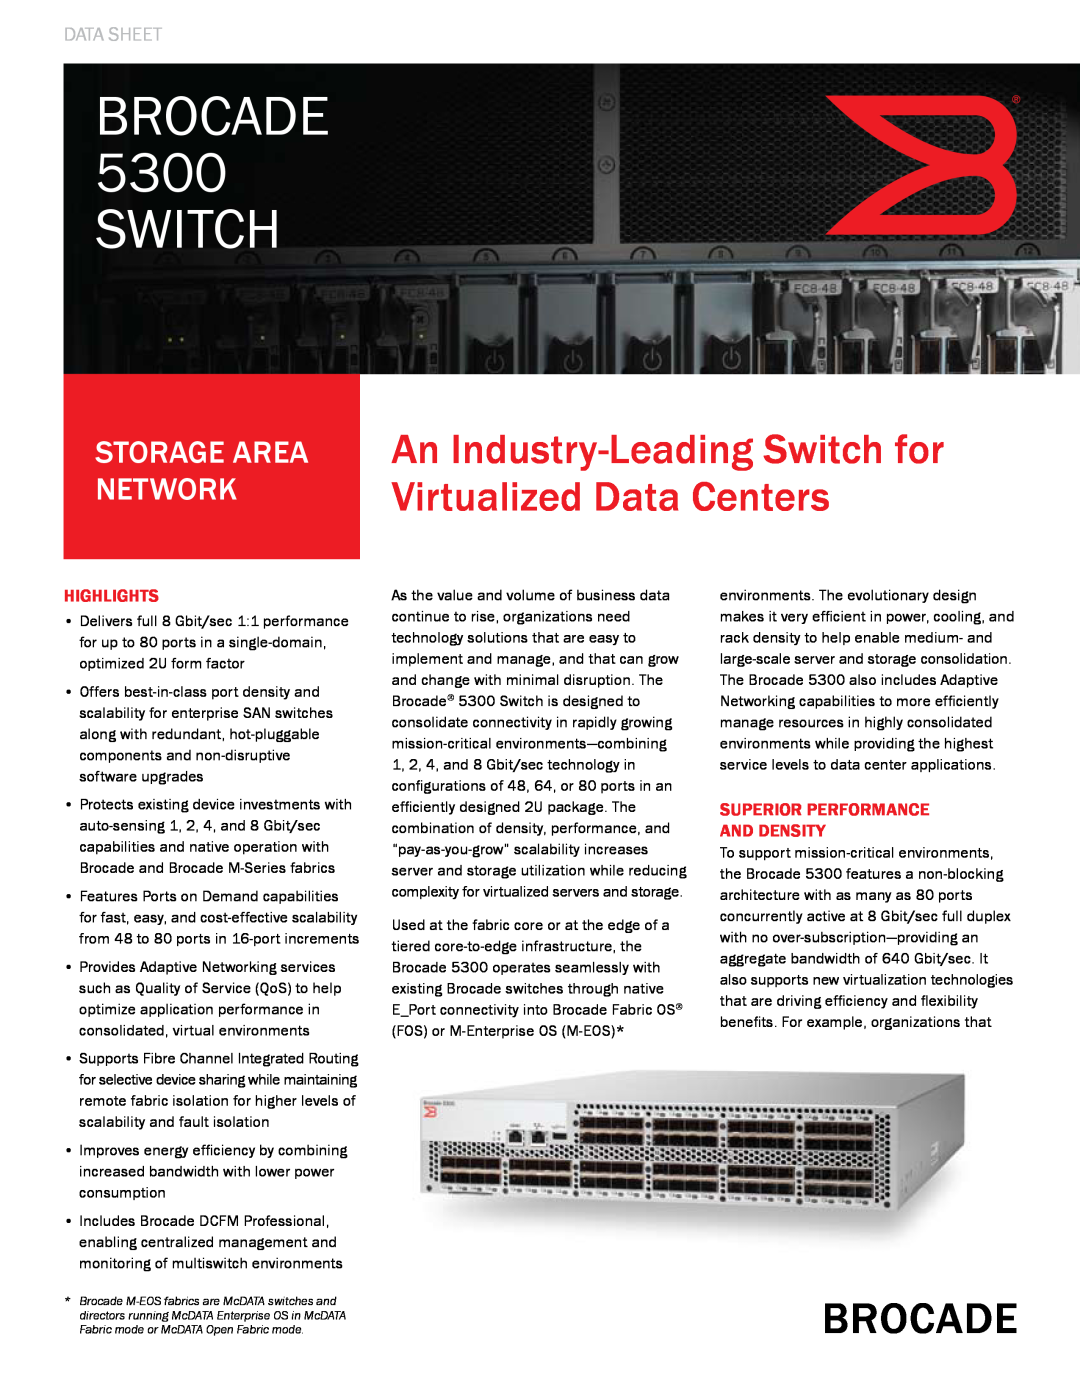 Brocade Communications Systems manual Data Sheet, Highlights, Superior Performance And Density, Brocade 5300 Switch 